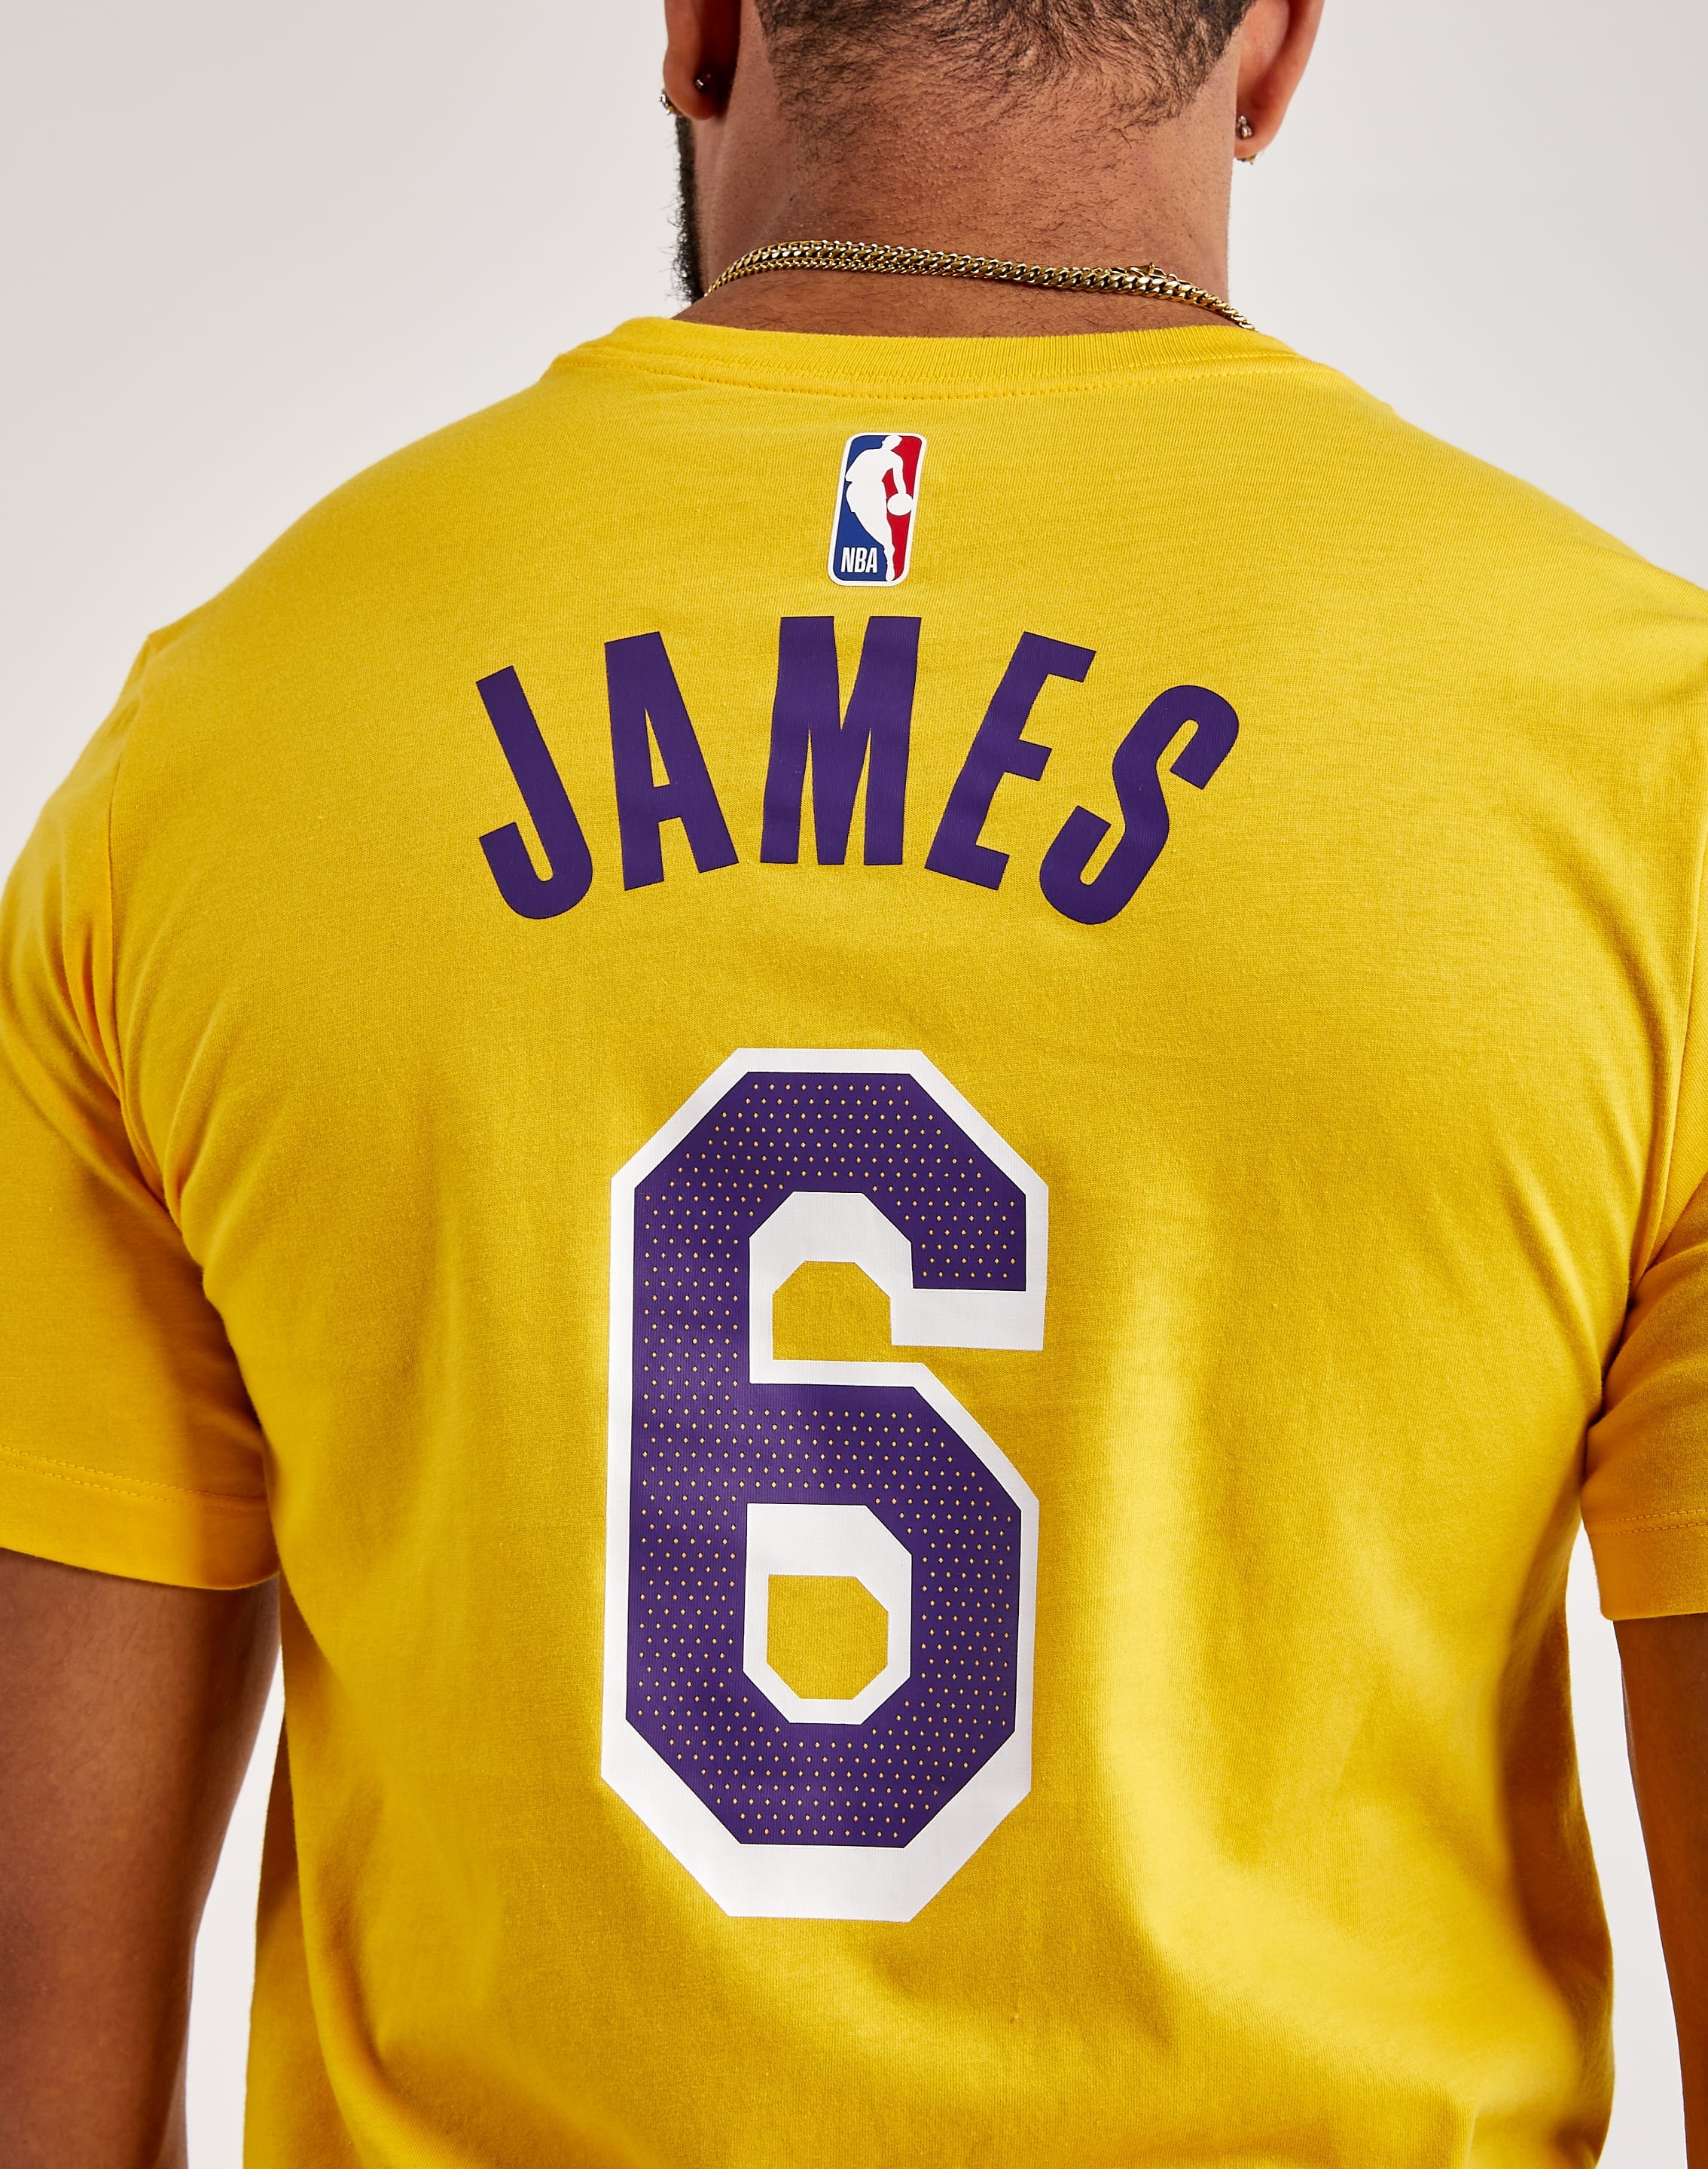 Adidas The Go-To Tee NBA T-Shirt - Los Angeles Lakers